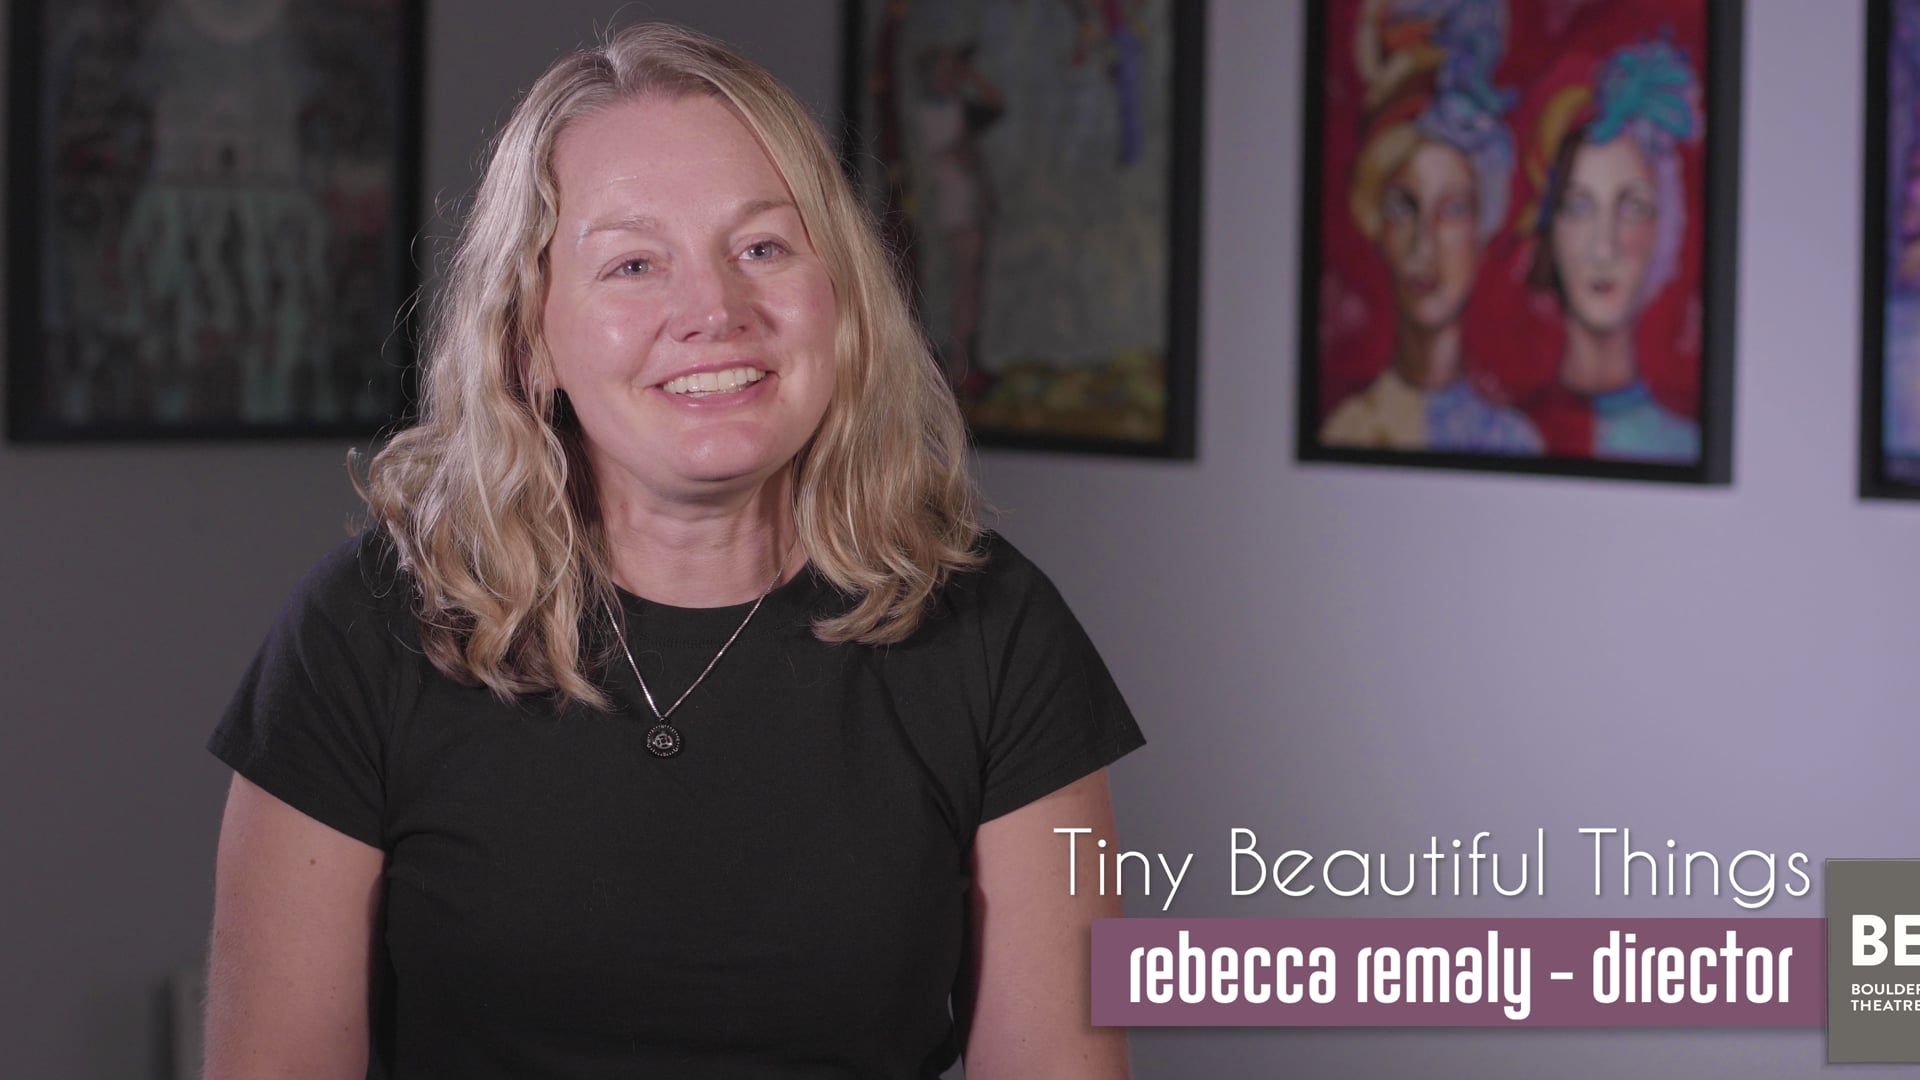 Meet the Cast of "Tiny Beautiful Things" - Rebecca Remaly (Director)